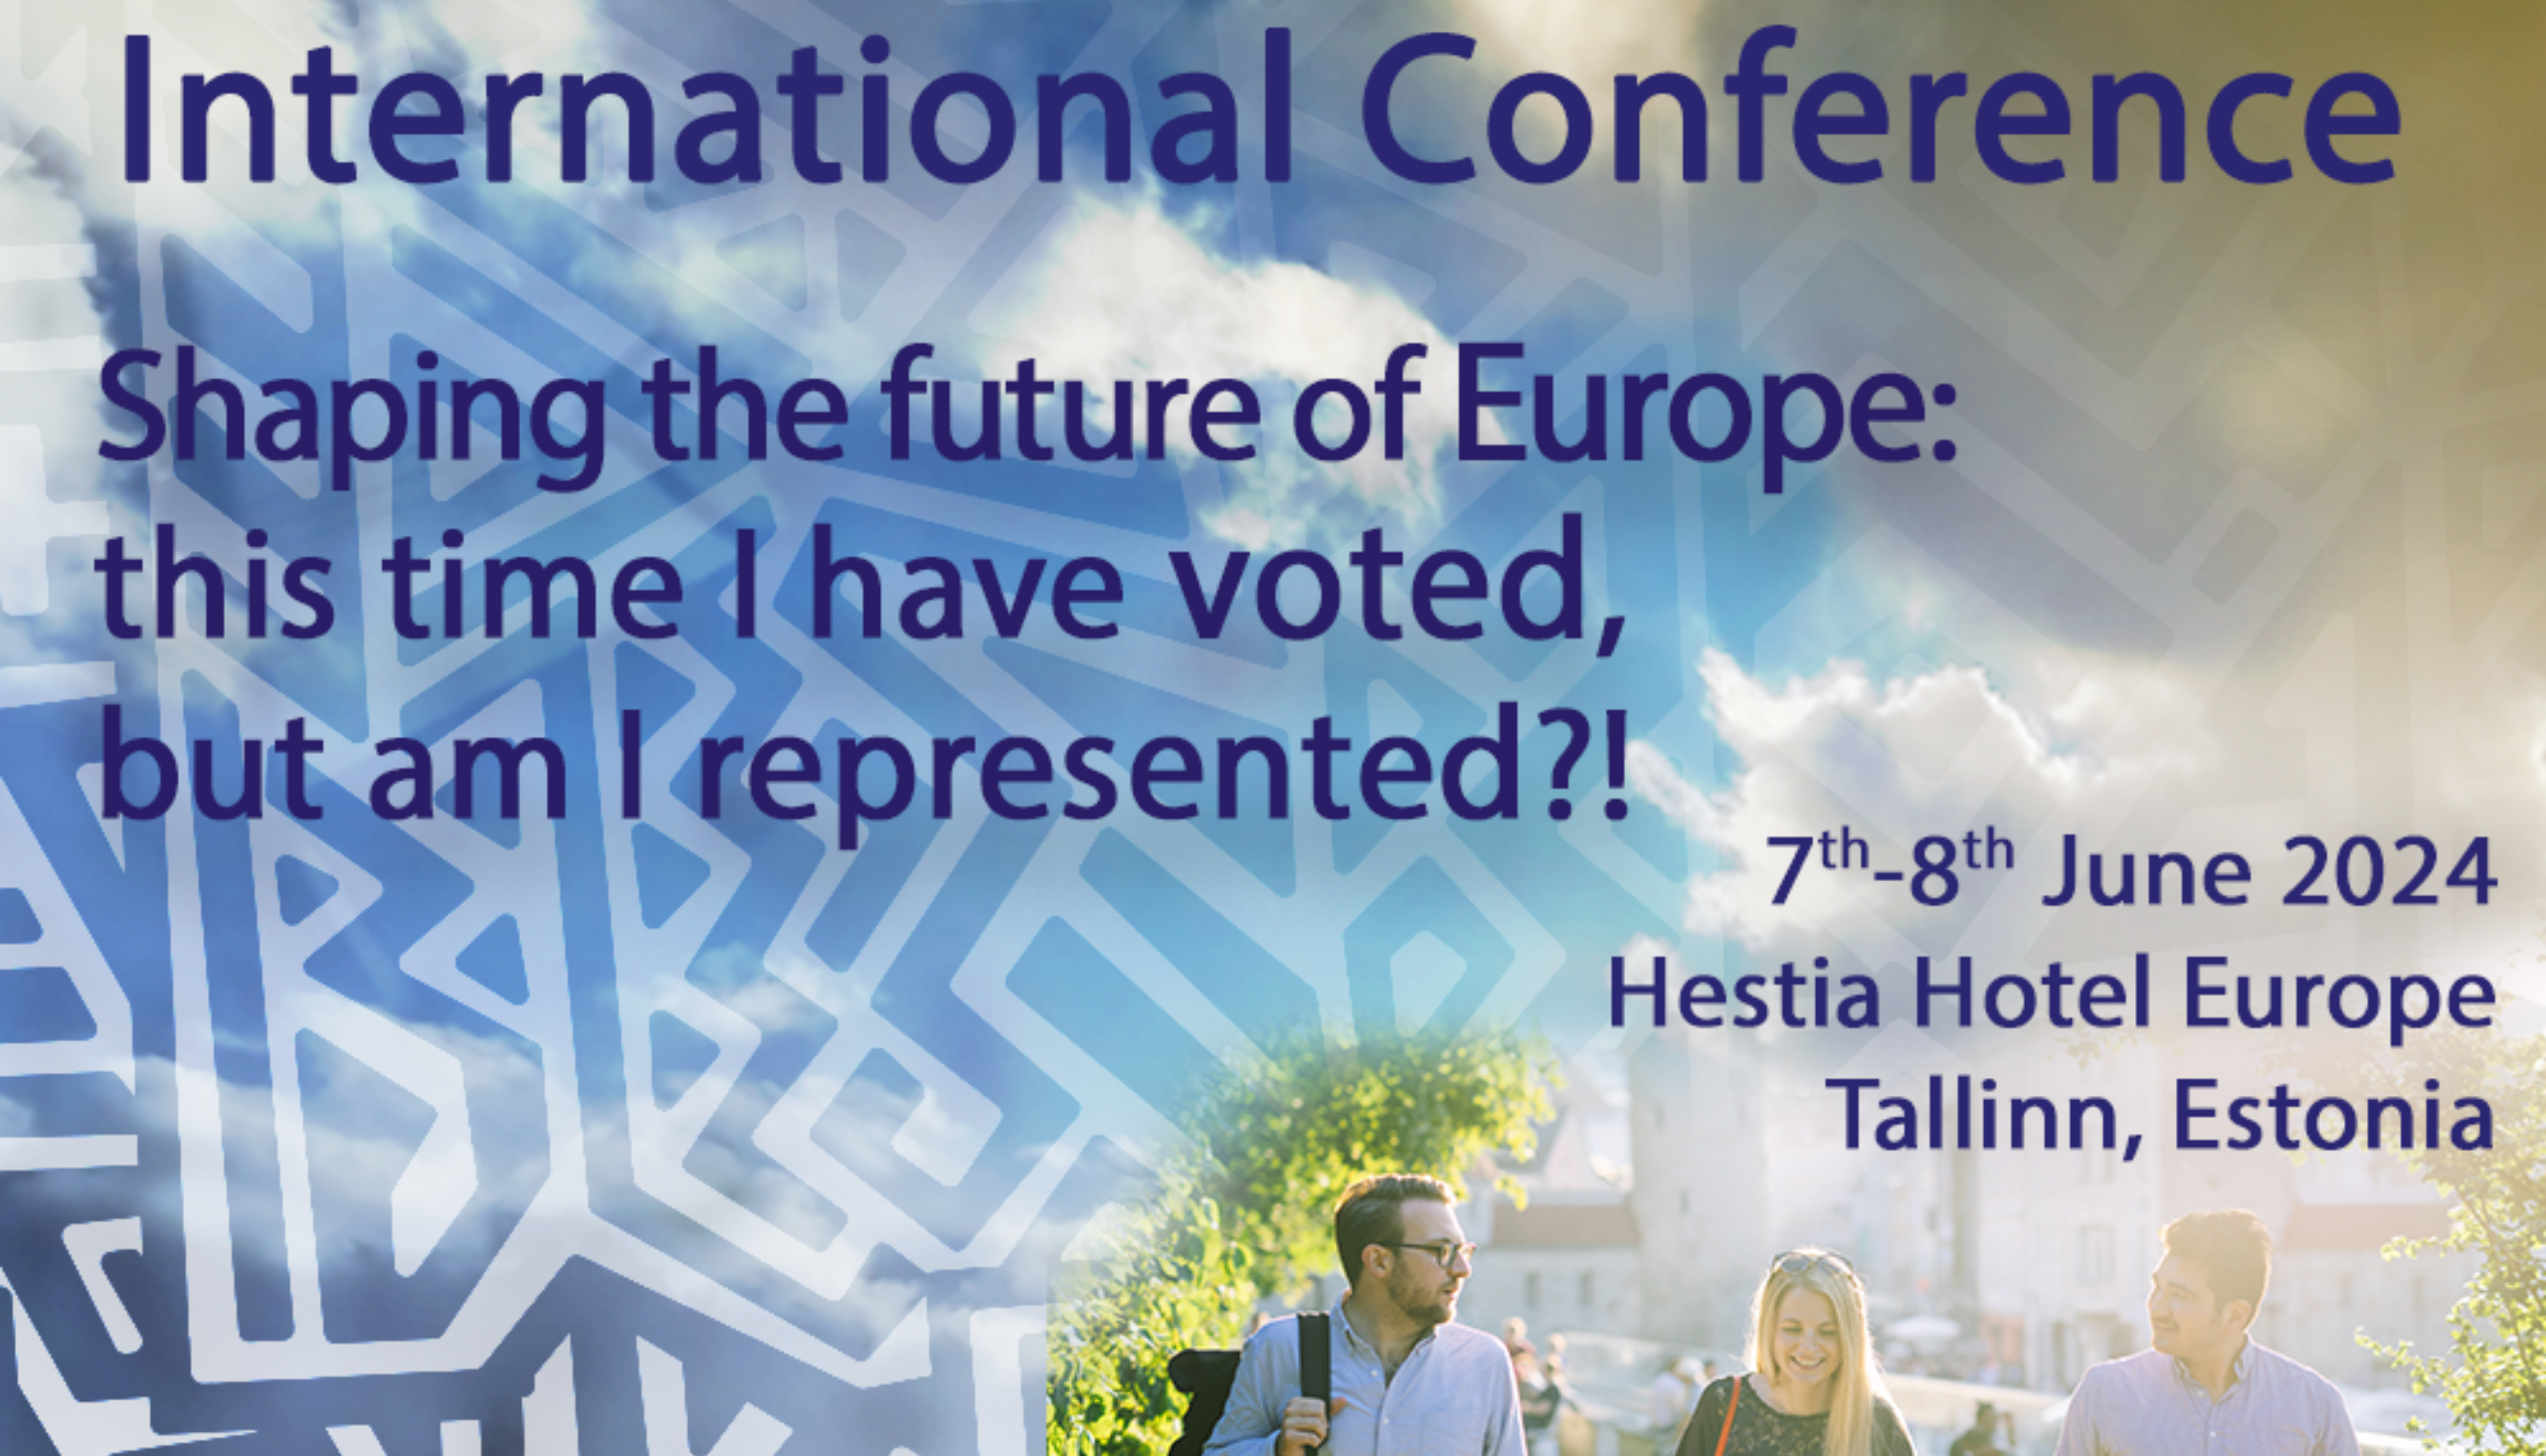 Invitation to the conference “Shaping the future of Europe: this time I have voted, but am I represented?” 7-8. June 2024 Tallinn